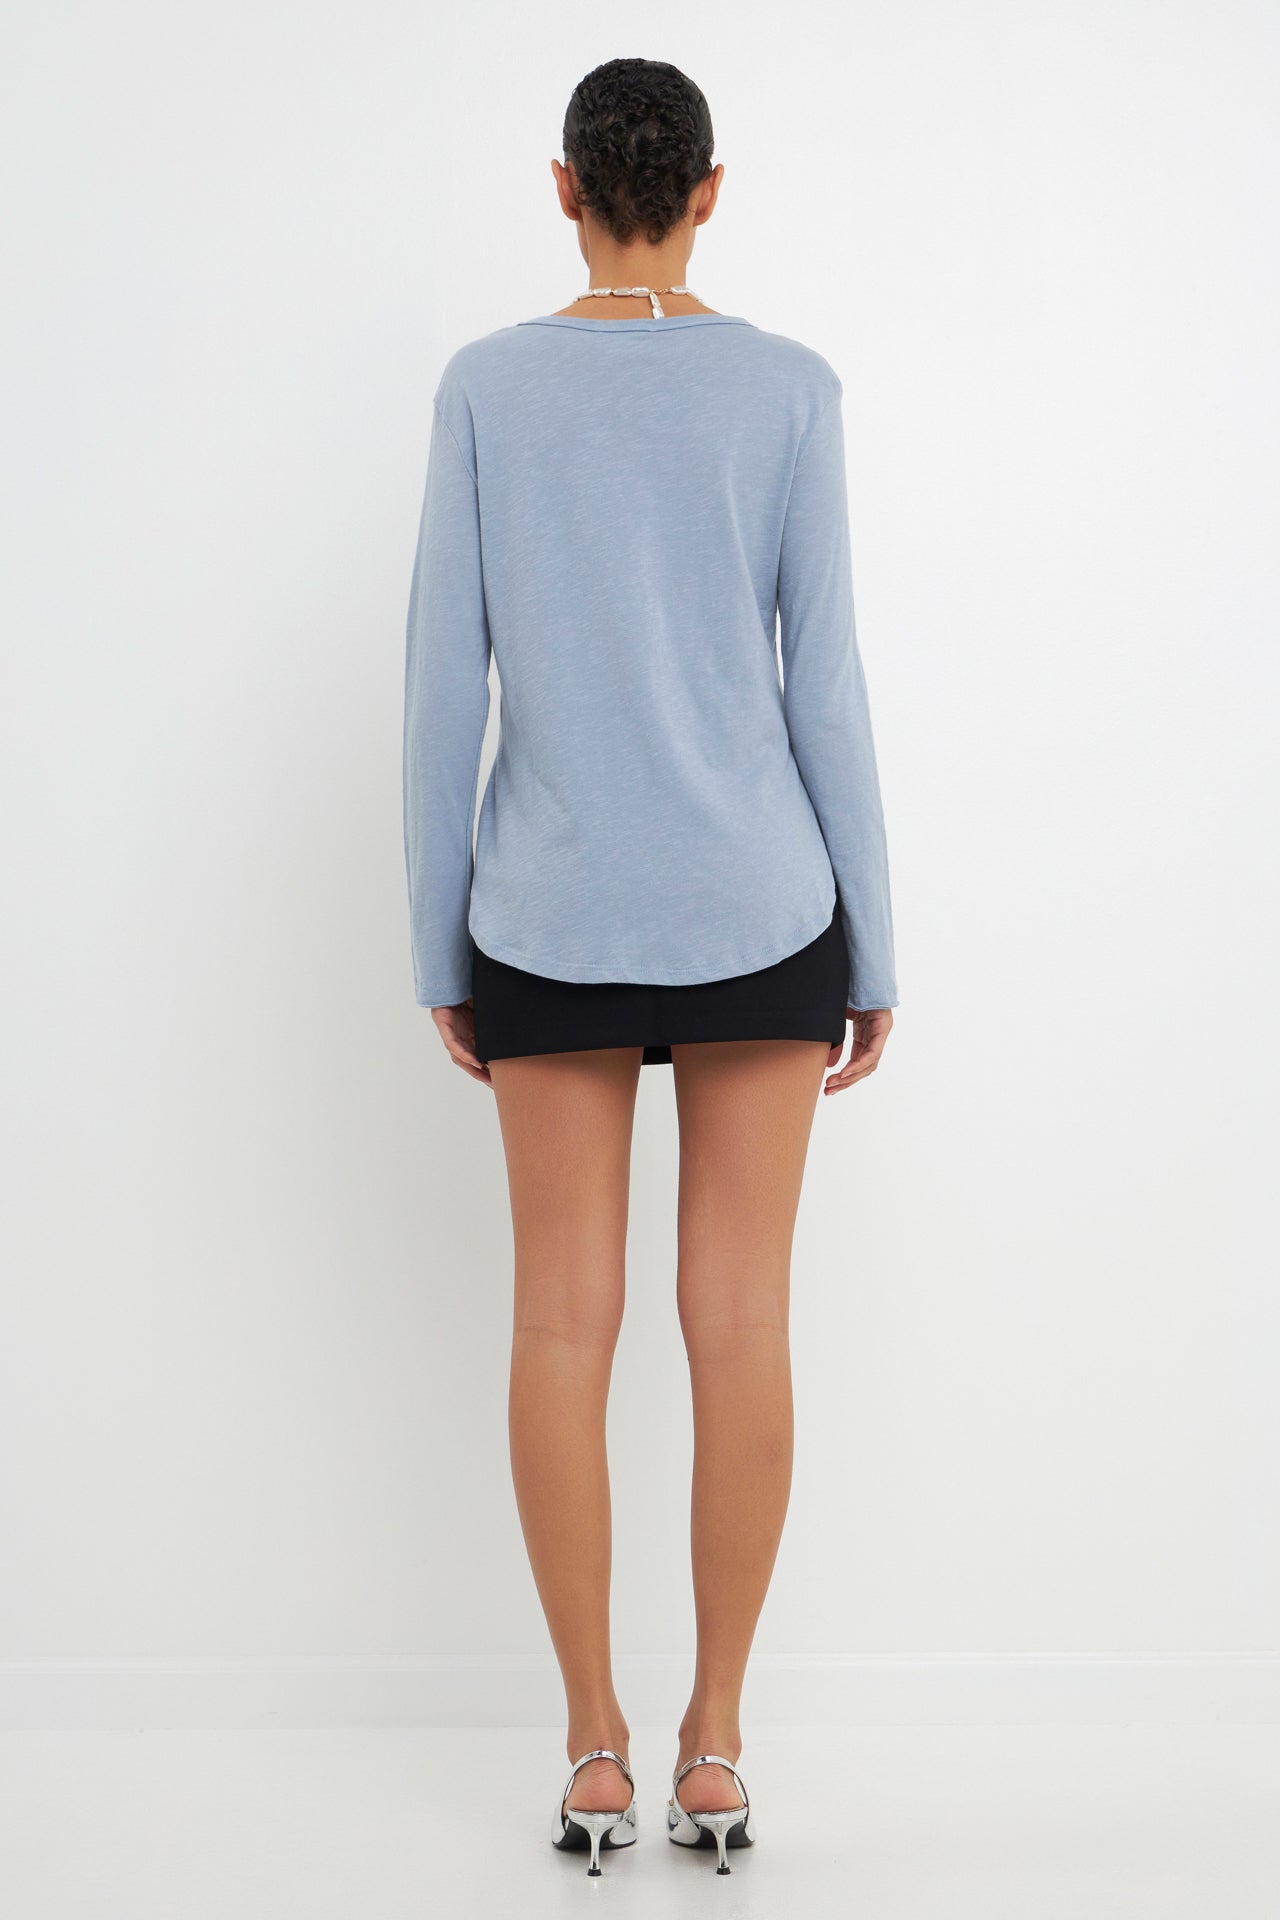 GREY LAB - Classic Round Neck Long Sleeves - TOPS available at Objectrare